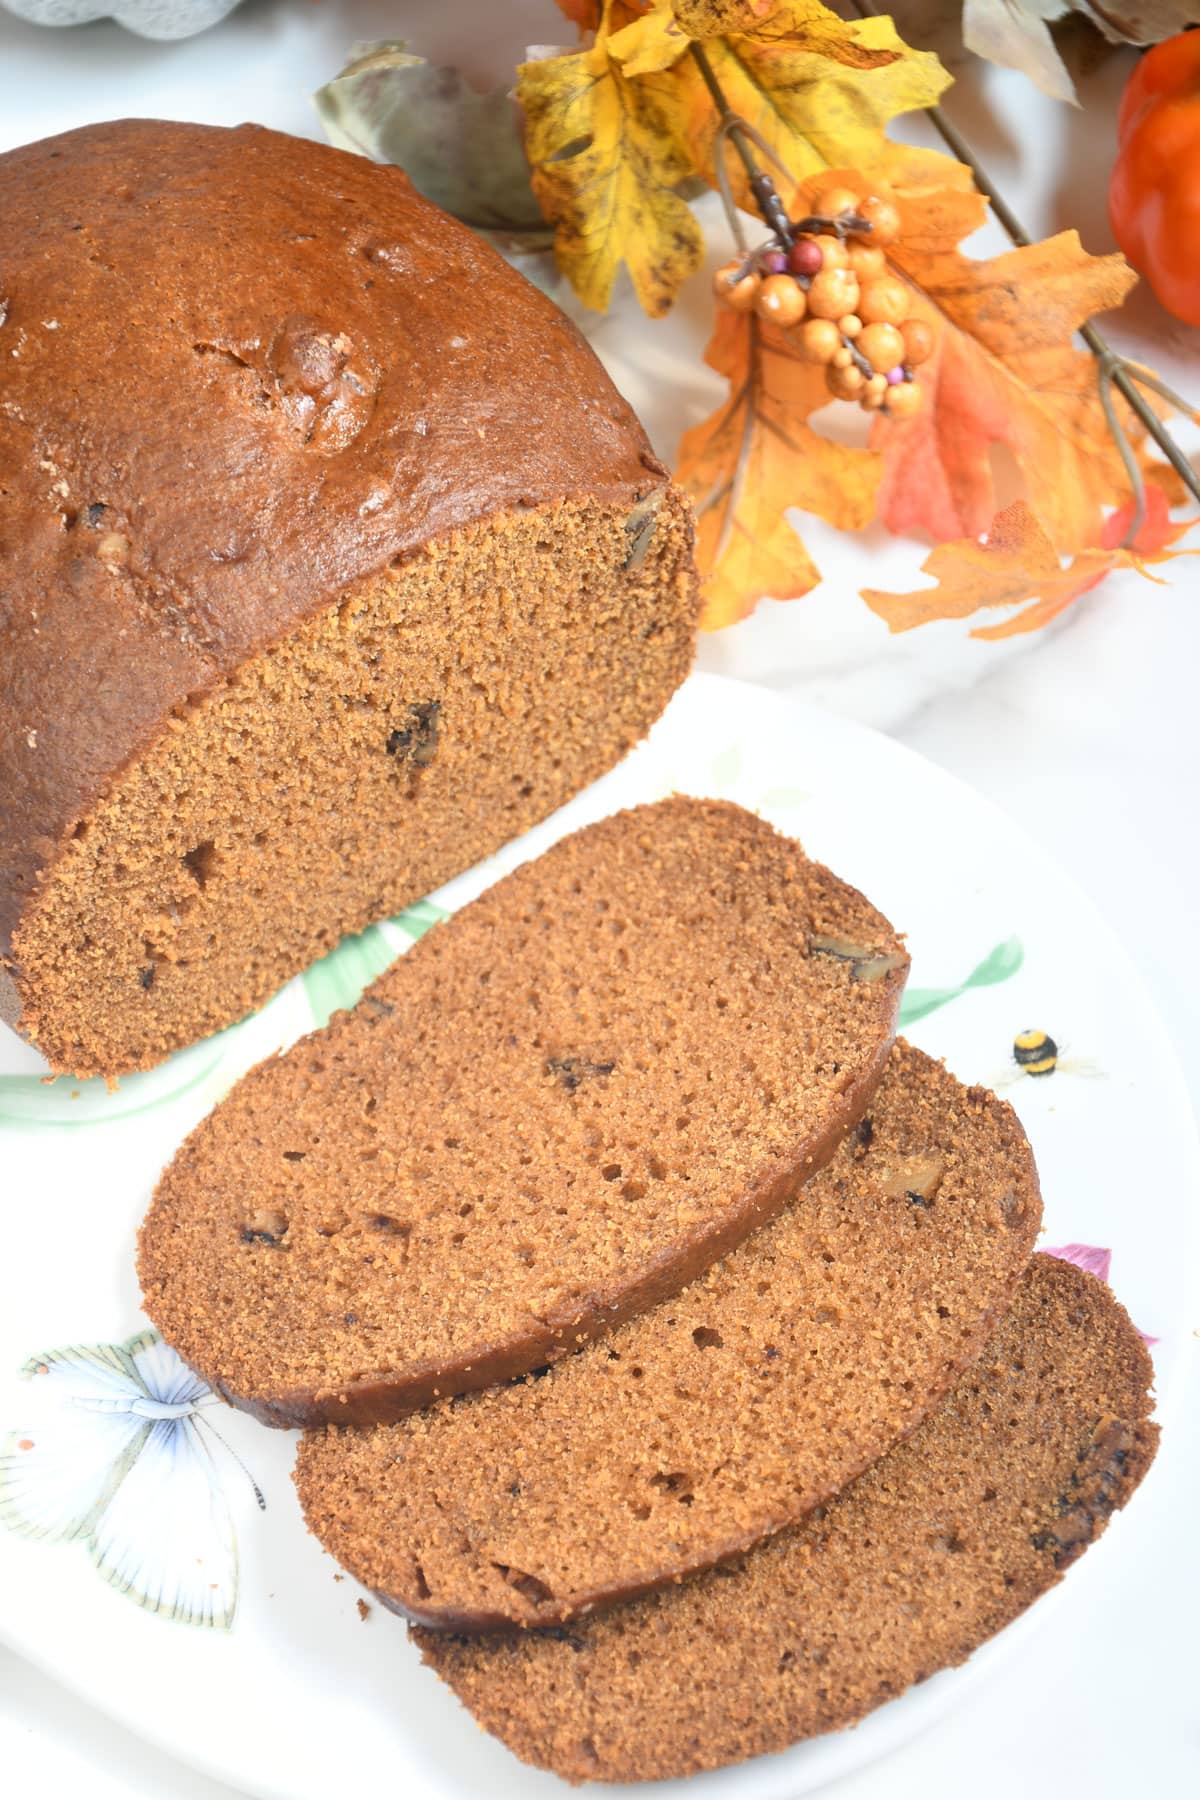 Pumpkin Bread slices on a plate.